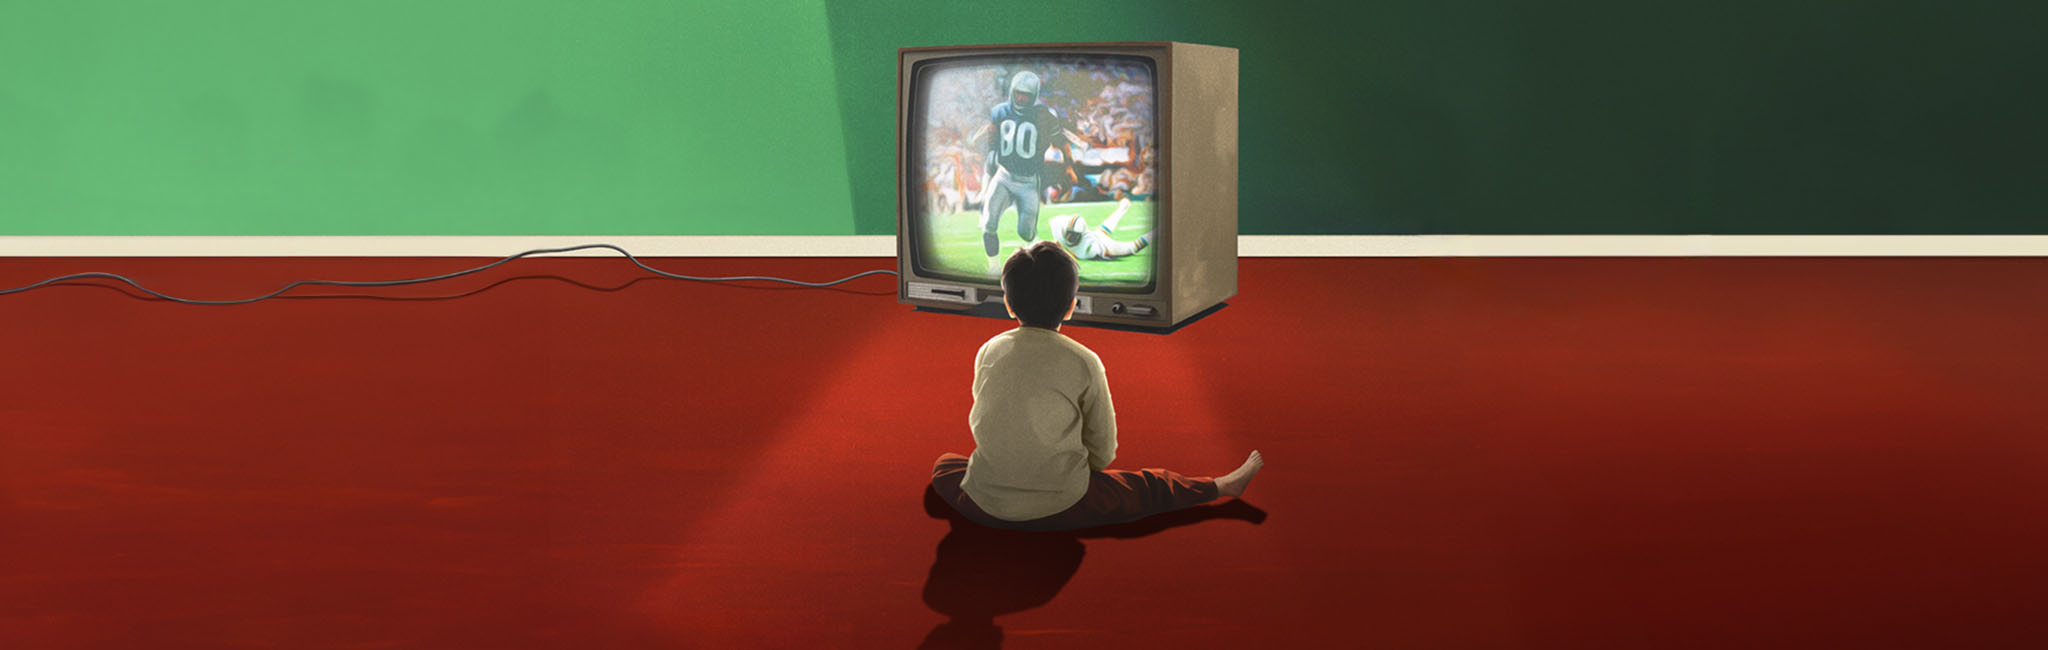 A boy sitting in front of a tv with a football game on.